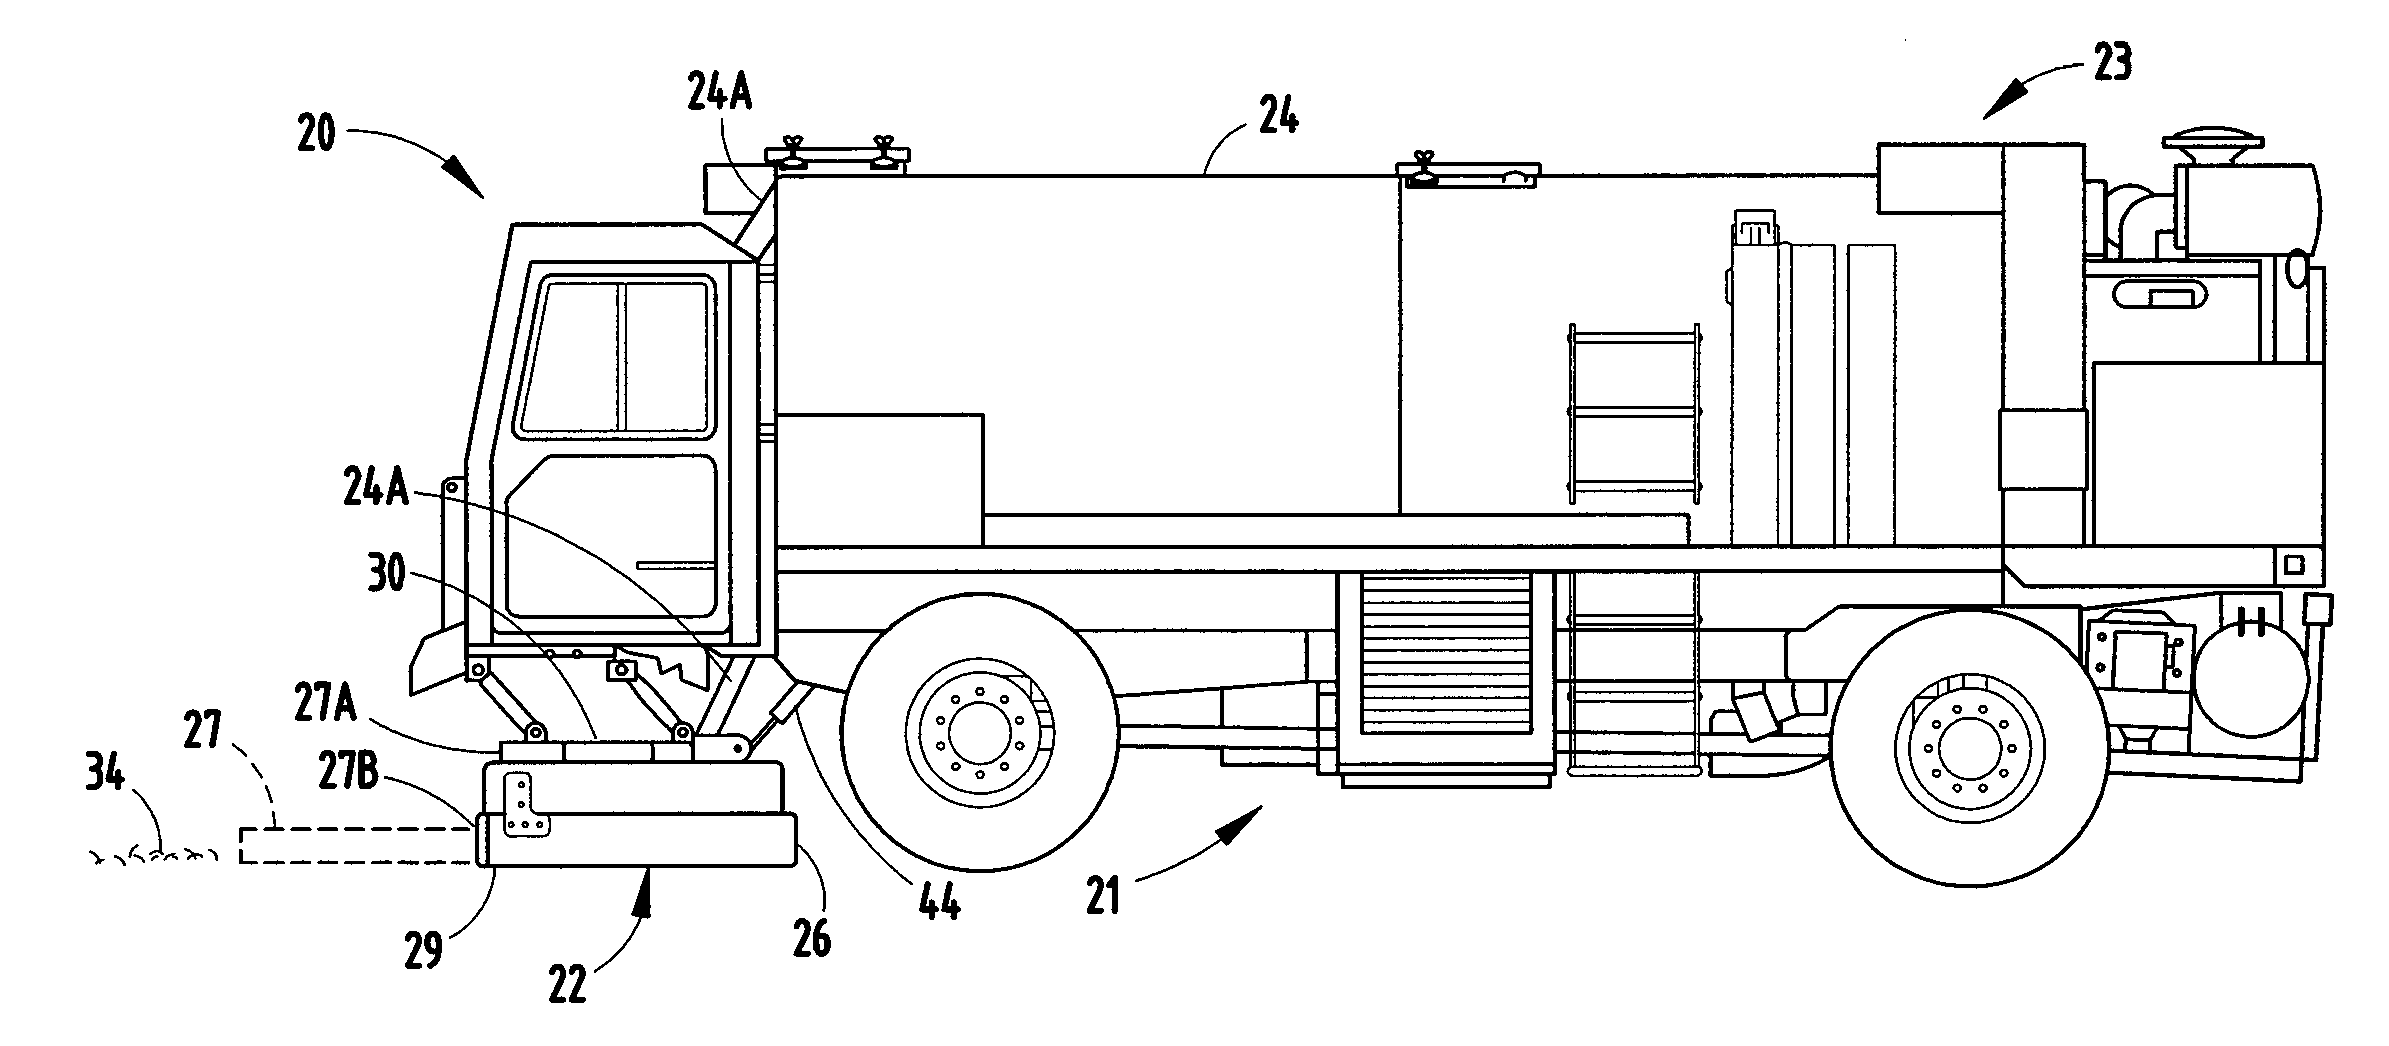 Vacuum truck with collapsible scraper and pivot relief